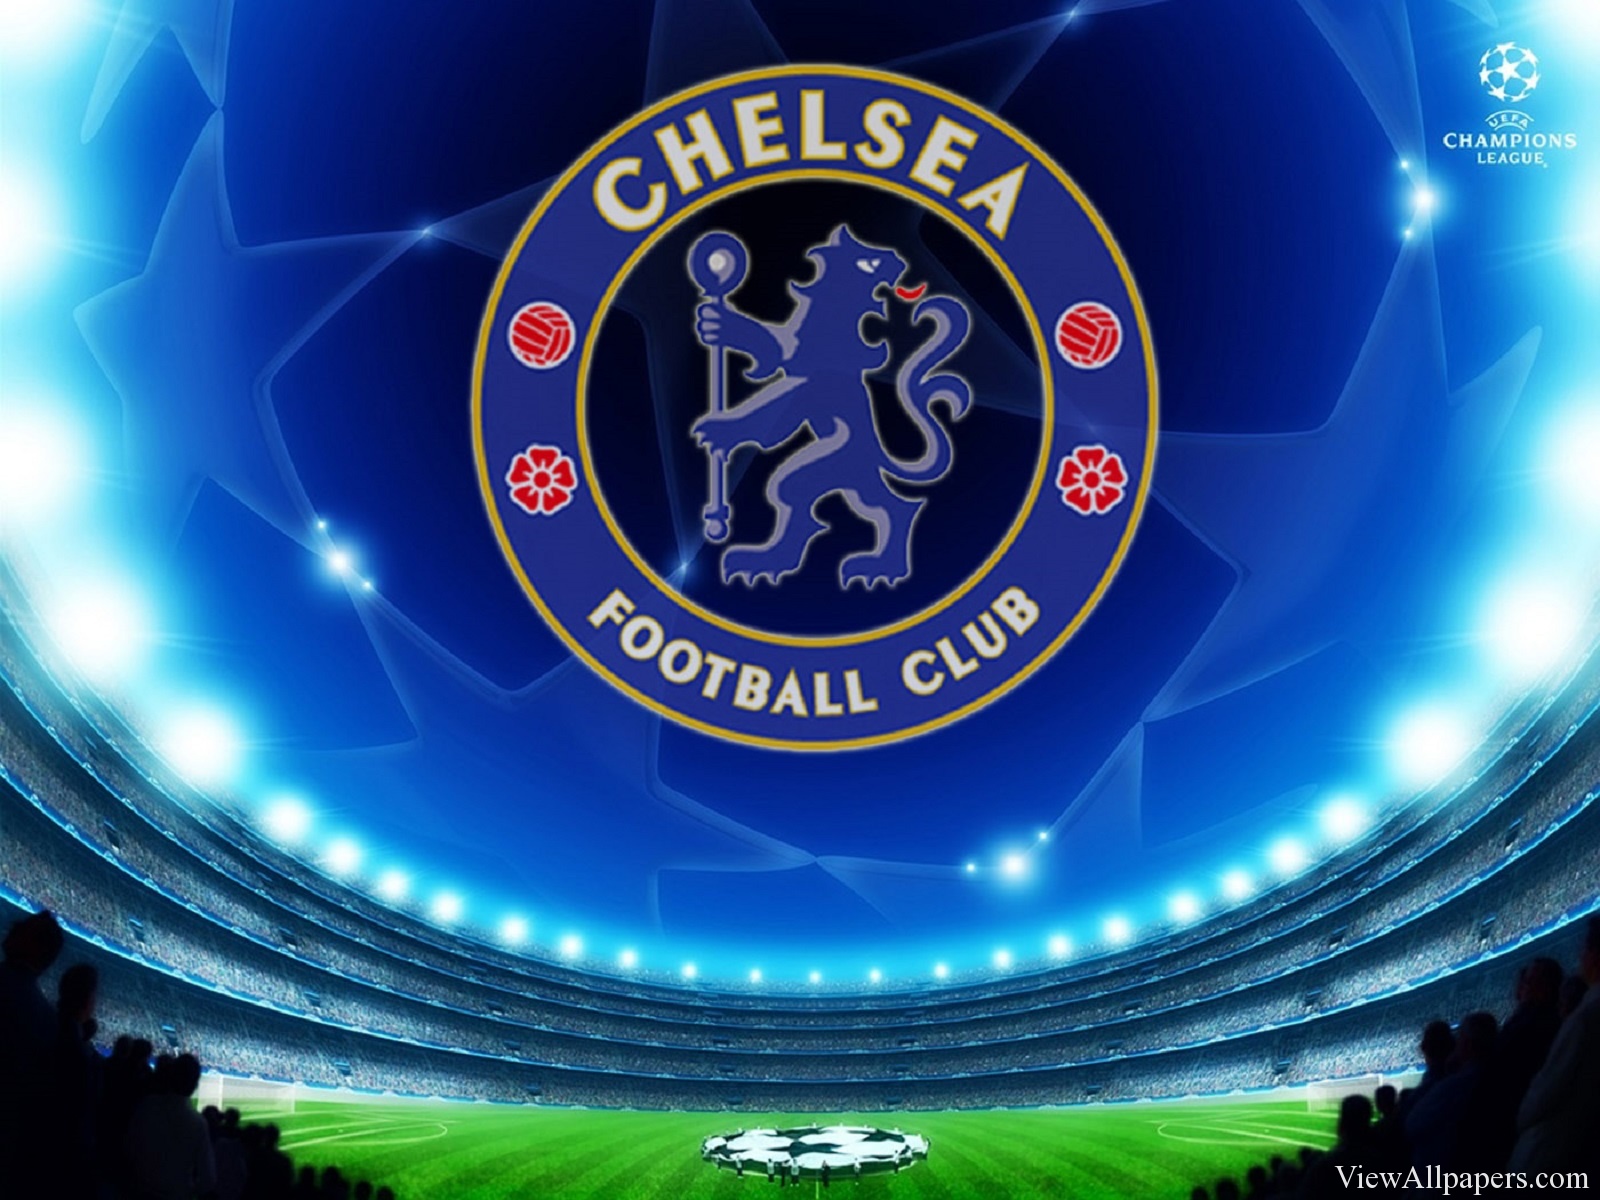 Chelsea FC Wallpaper High Resolution Free download Chelsea FC